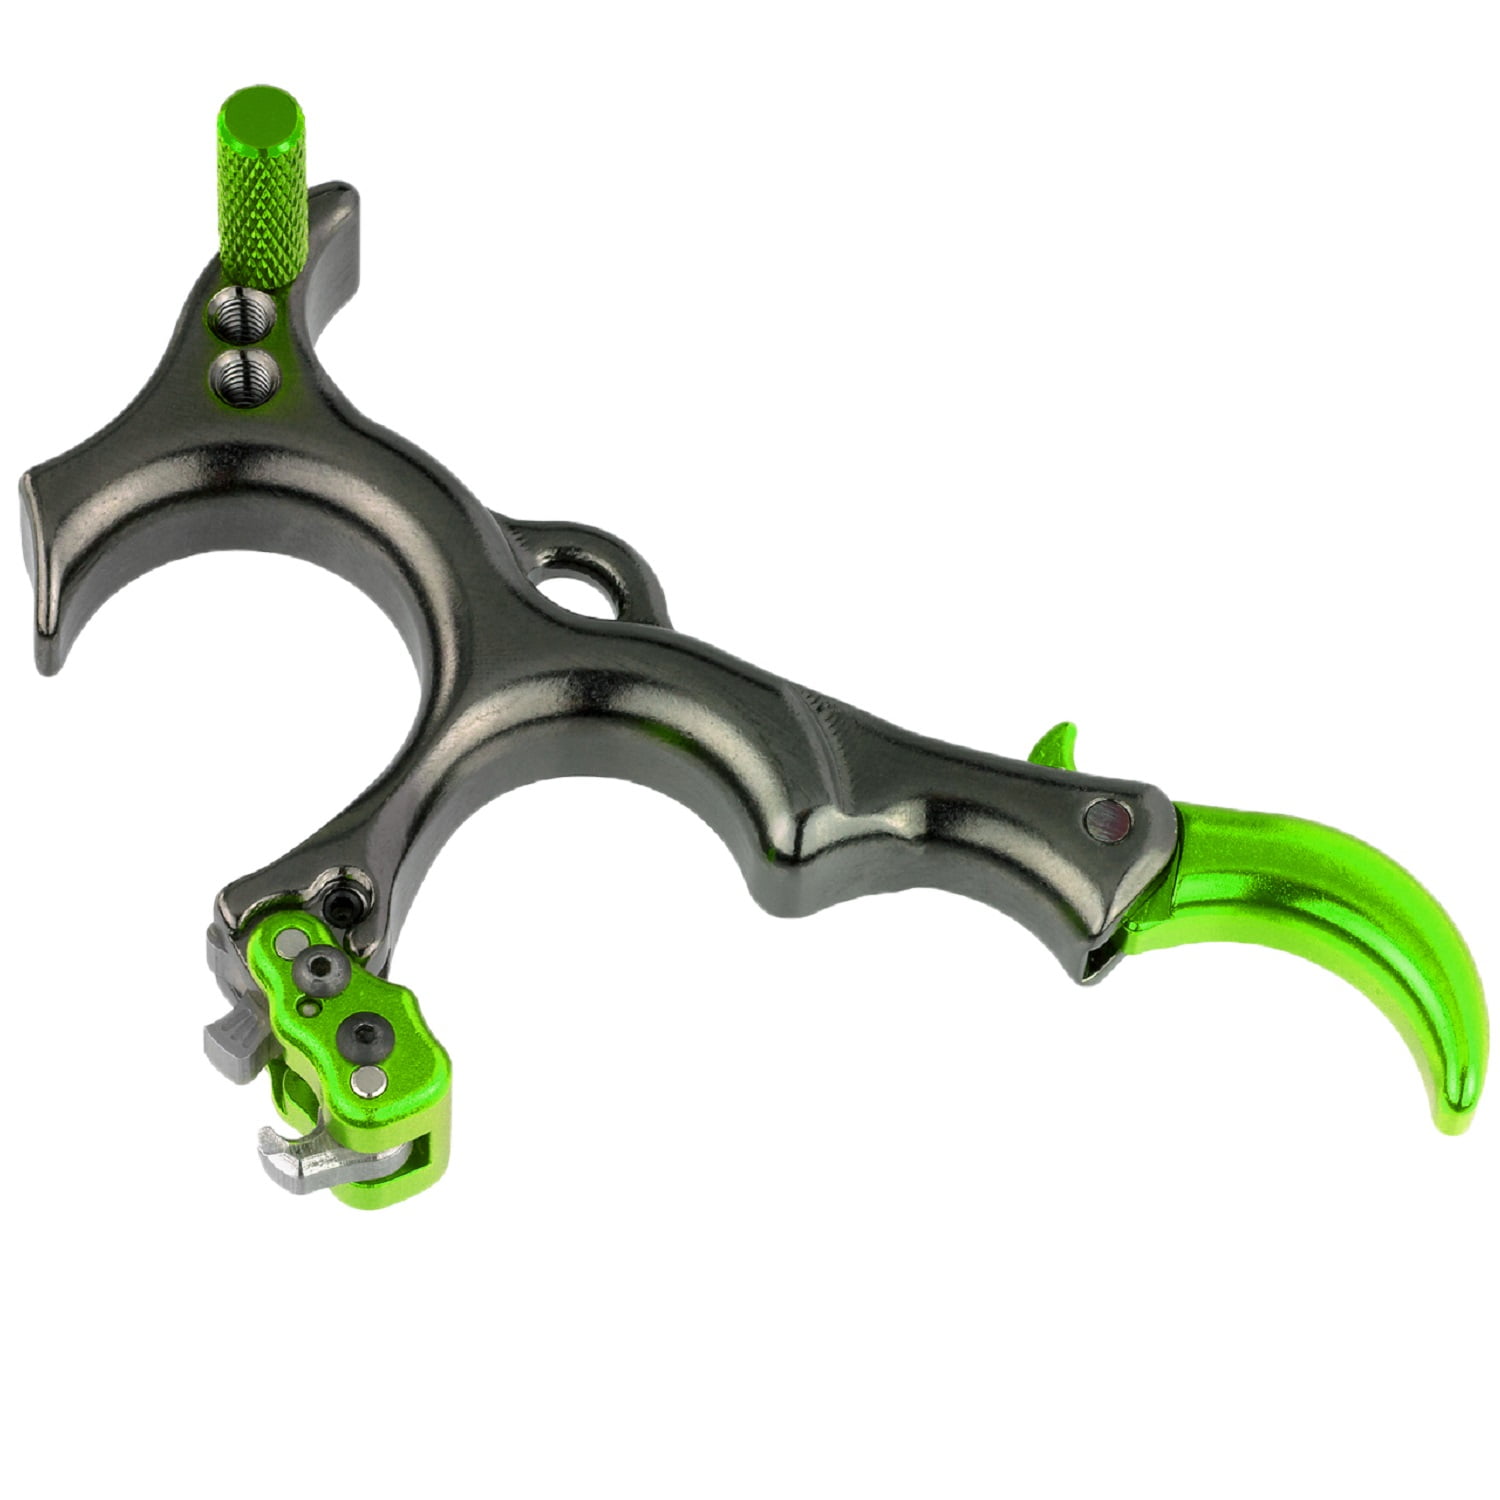 TruFire Corp Sear Back Tension Release Green 4 Finger BTG X4 for sale online 